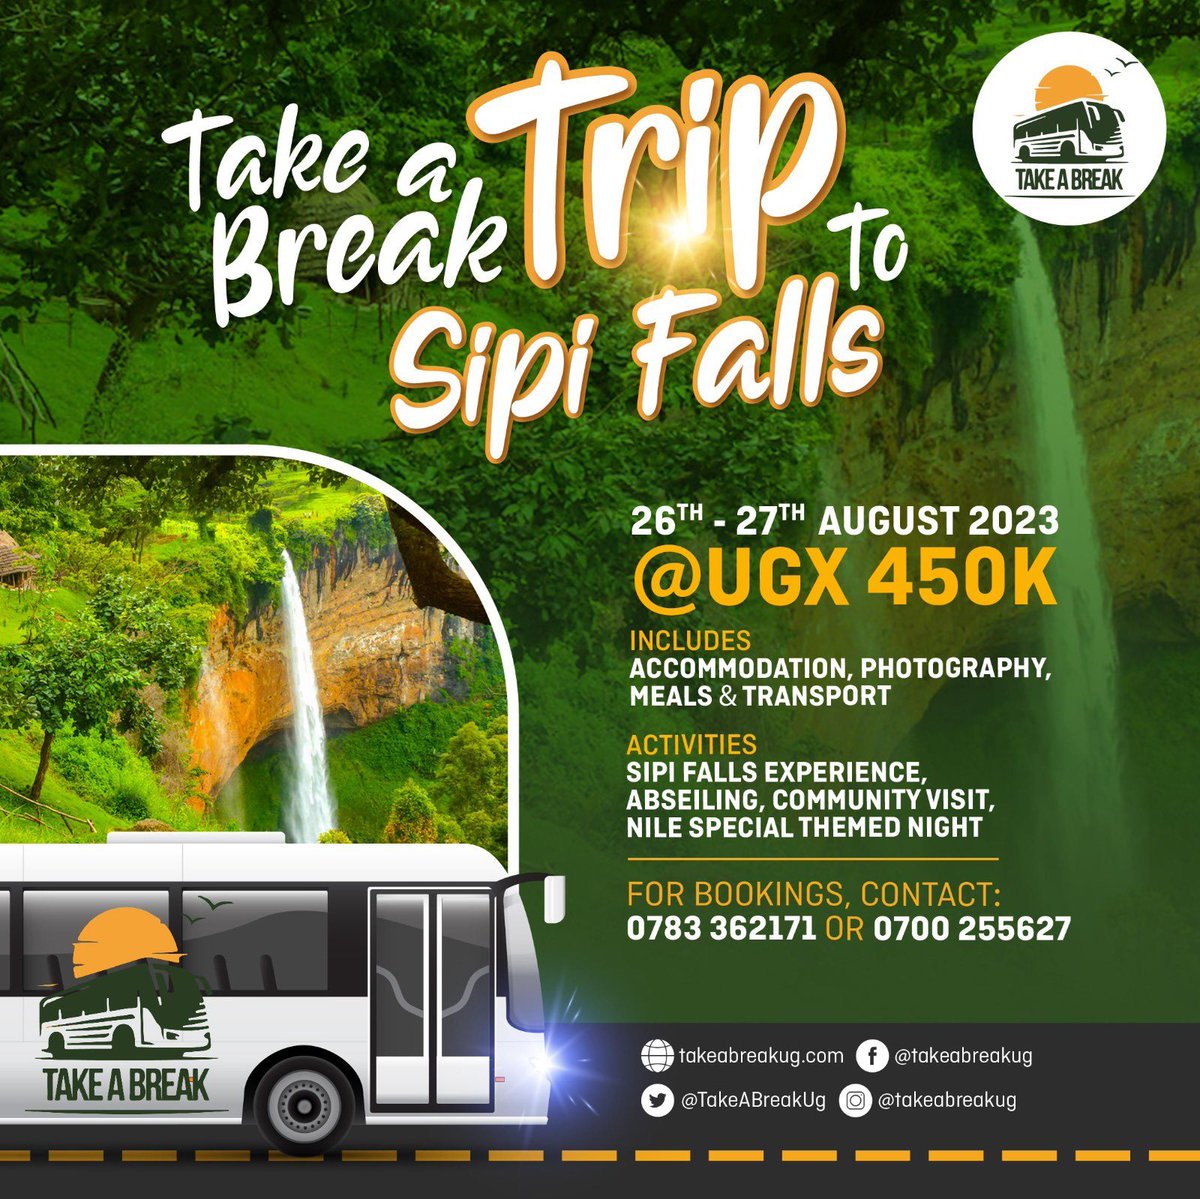 Sipi Falls is a hidden gem nestled in the stunning landscapes of Kapchorwa. Get ready to immerse yourself in the awe-inspiring scenery of lush greenery, towering cliffs, and cascading waterfalls. Interested in coming along with us? Send us a DM now. #TakeABreak #MadeOfUganda